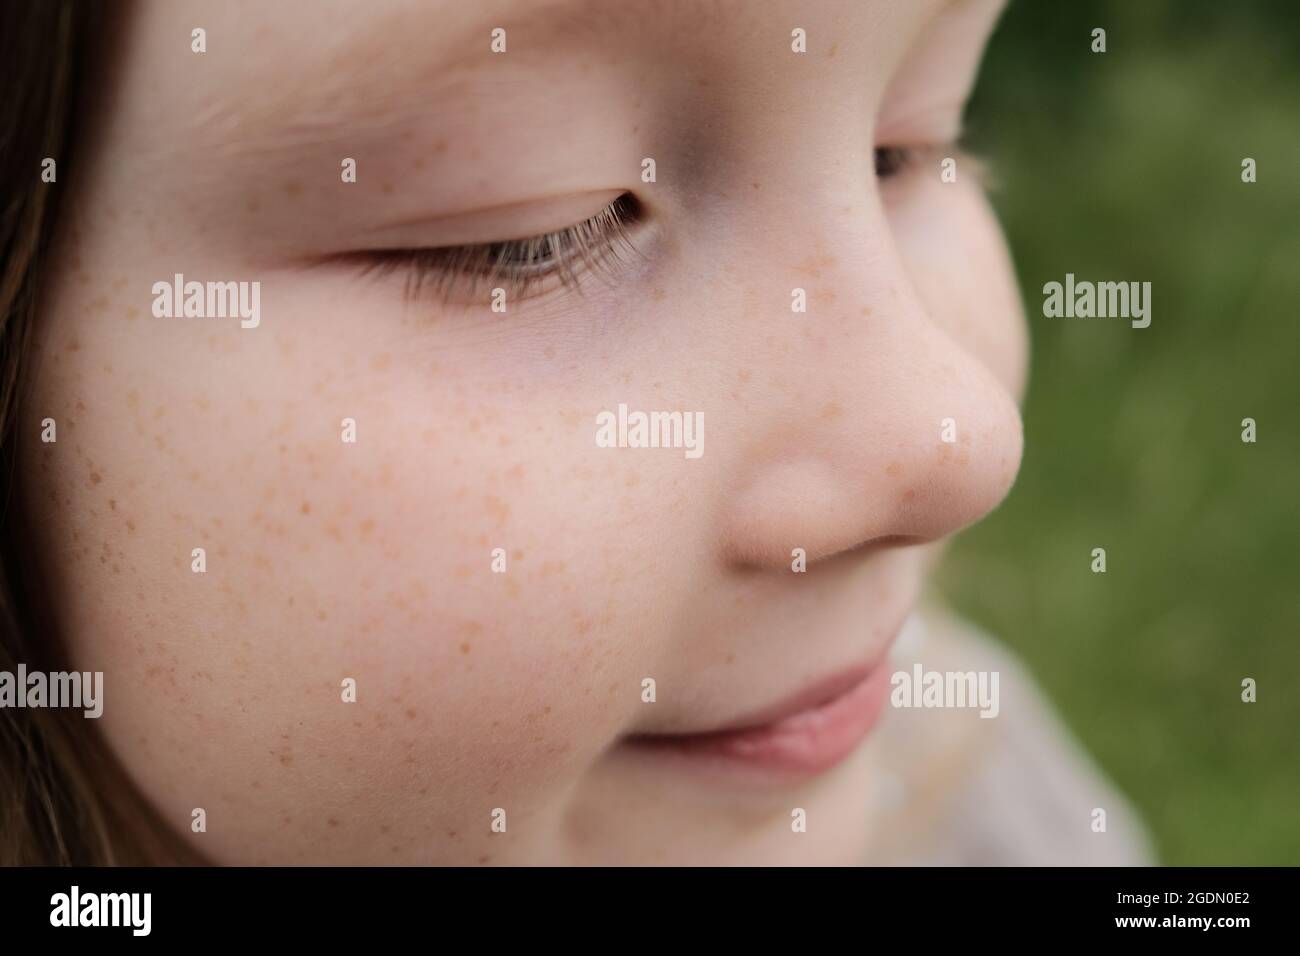 Closeup face of adorable little girl with freckles on cheeks and nose resting in nature Stock Photo